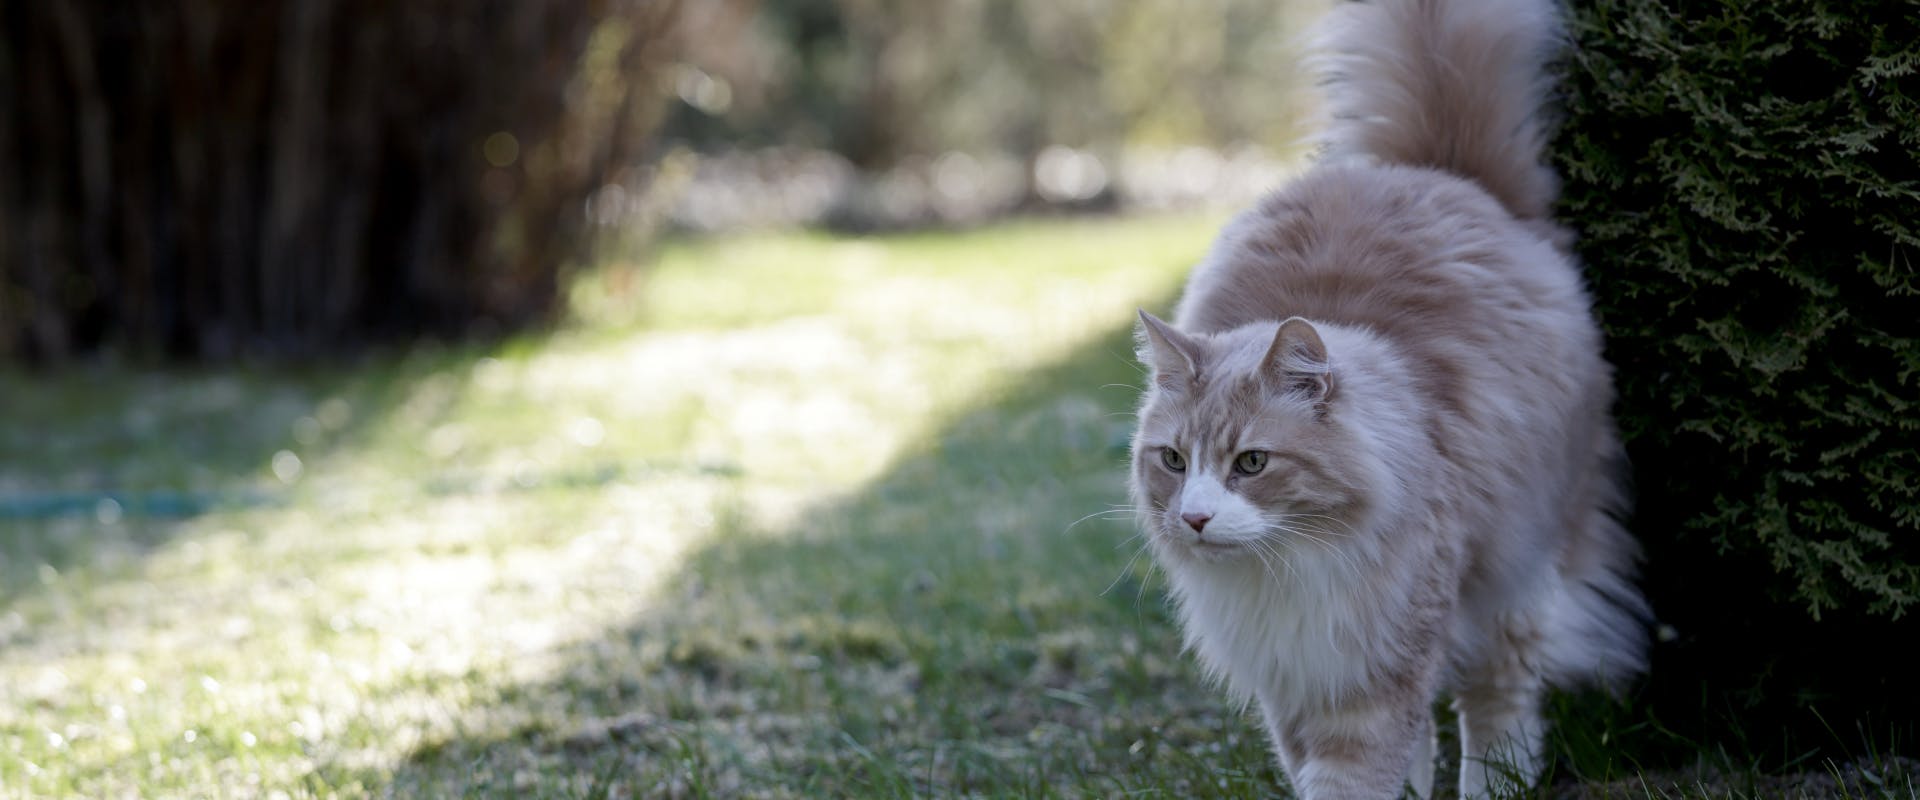 a long-haired white and tanned cat spraying a hedge in a garden